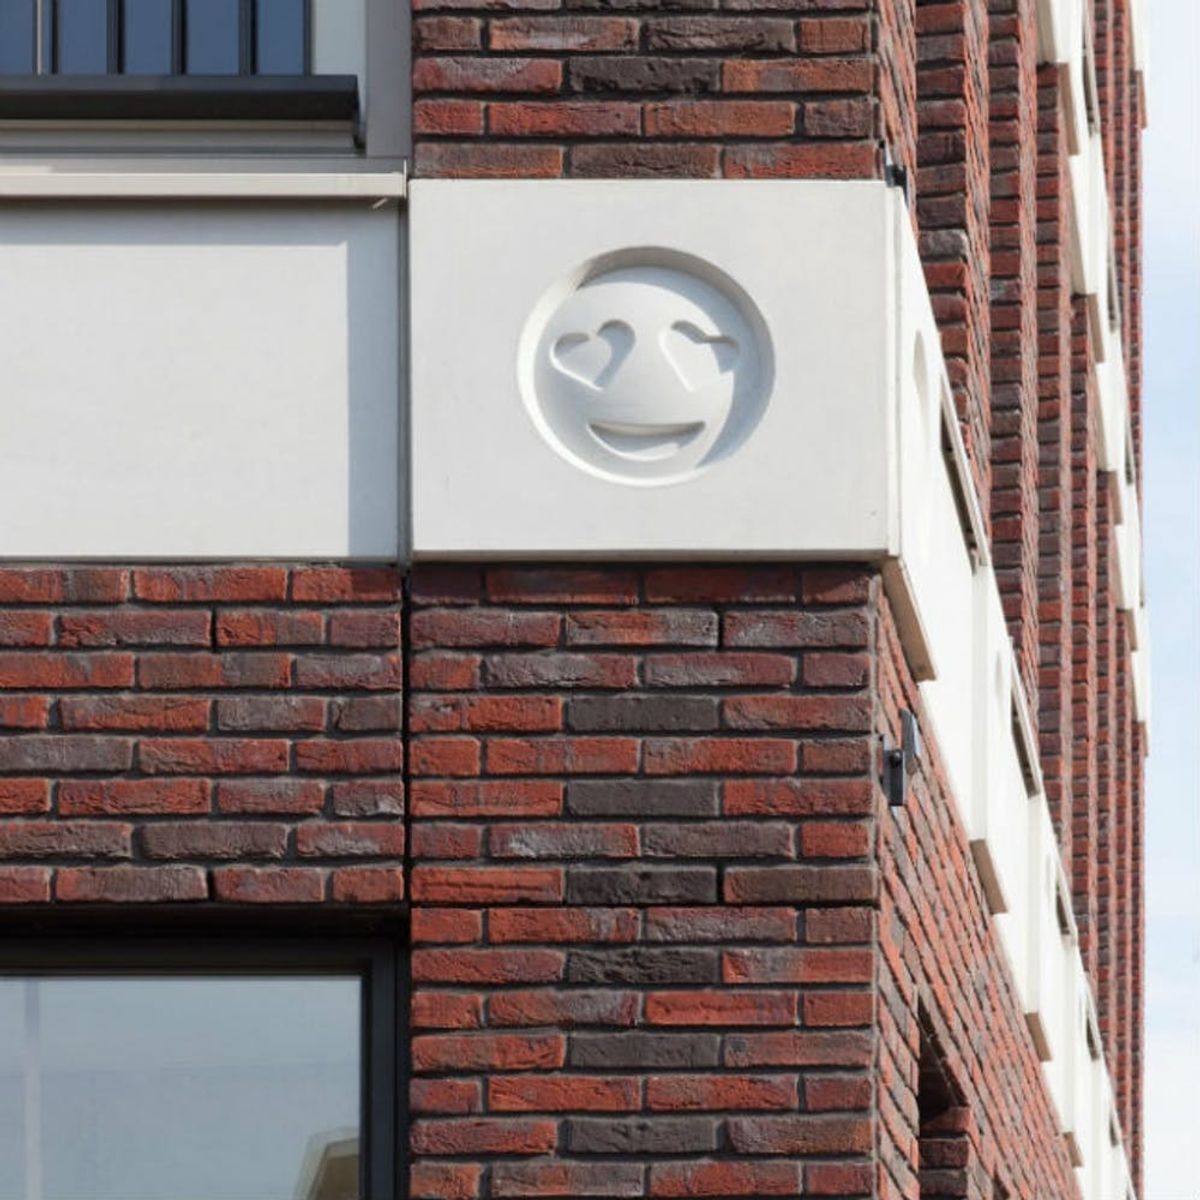 You’ll Go Heart-Eyed Over This Building’s Modern Emoji Design